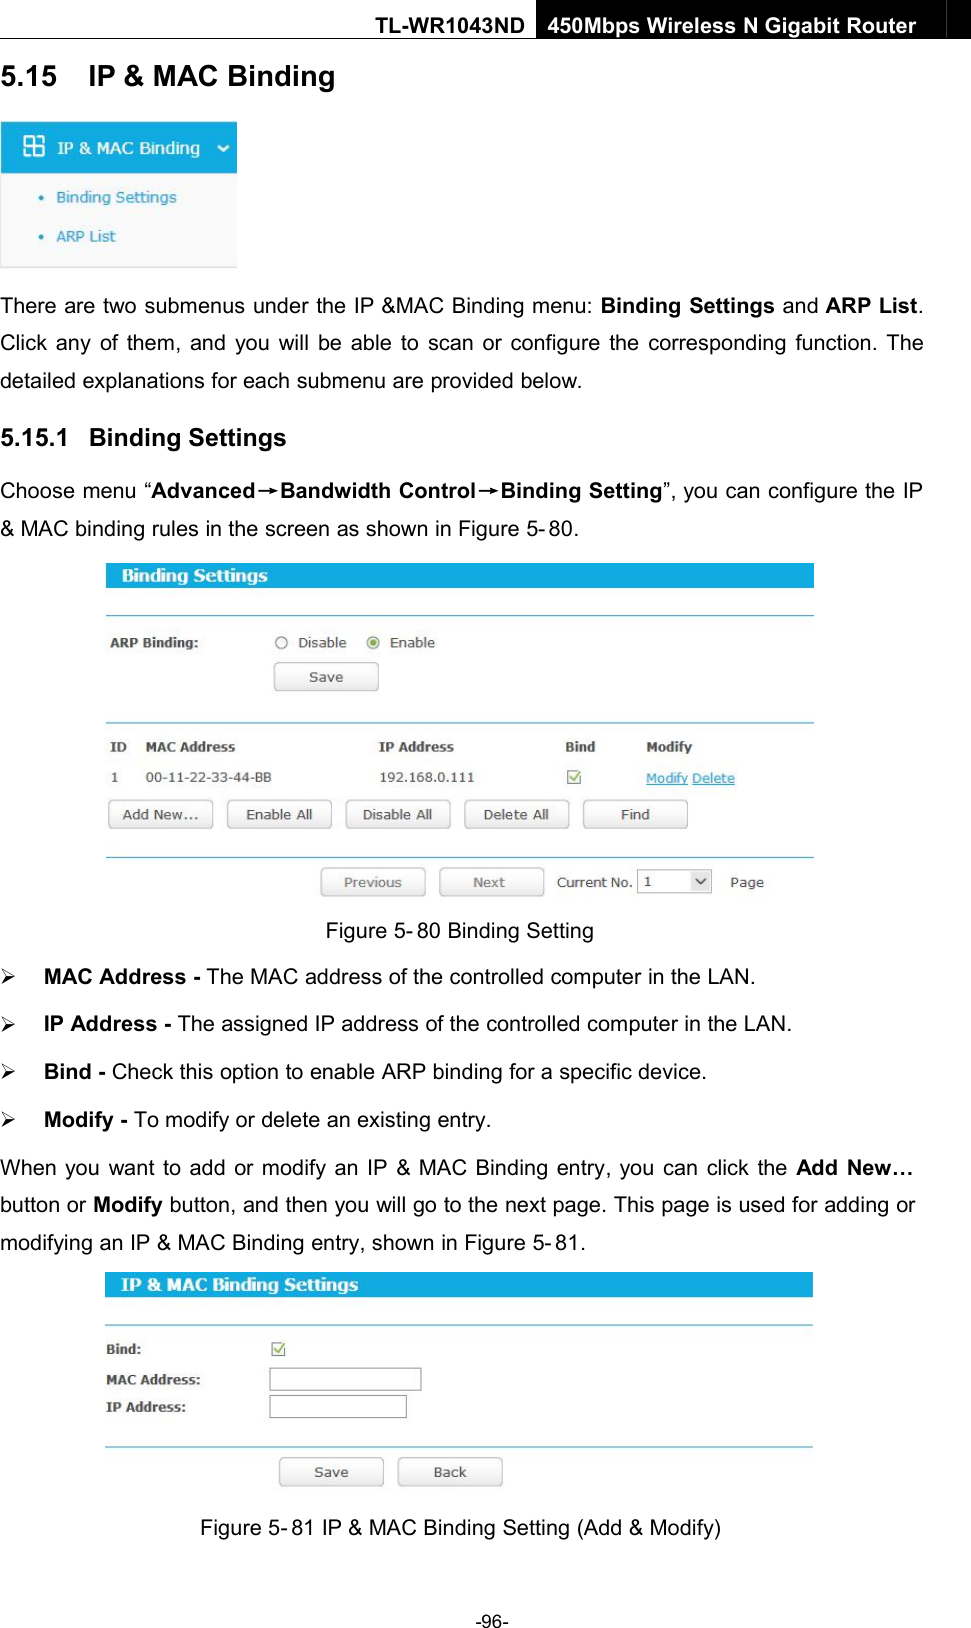 -96-TL-WR1043ND450Mbps Wireless N Gigabit Router5.15 IP &amp; MAC BindingThere are two submenus under the IP &amp;MAC Binding menu: Binding Settings and ARP List.Click any of them, and you will be able to scan or configure the corresponding function. Thedetailed explanations for each submenu are provided below.5.15.1 Binding SettingsChoose menu “Advanced→Bandwidth Control→Binding Setting”, you can configure the IP&amp; MAC binding rules in the screen as shown in Figure 5- 80.Figure 5- 80 Binding SettingMAC Address - The MAC address of the controlled computer in the LAN.IP Address - The assigned IP address of the controlled computer in the LAN.Bind - Check this option to enable ARP binding for a specific device.Modify - To modify or delete an existing entry.When you want to add or modify an IP &amp; MAC Binding entry, you can click the Add New…button or Modify button, and then you will go to the next page. This page is used for adding ormodifying an IP &amp; MAC Binding entry, shown in Figure 5- 81.Figure 5- 81 IP &amp; MAC Binding Setting (Add &amp; Modify)